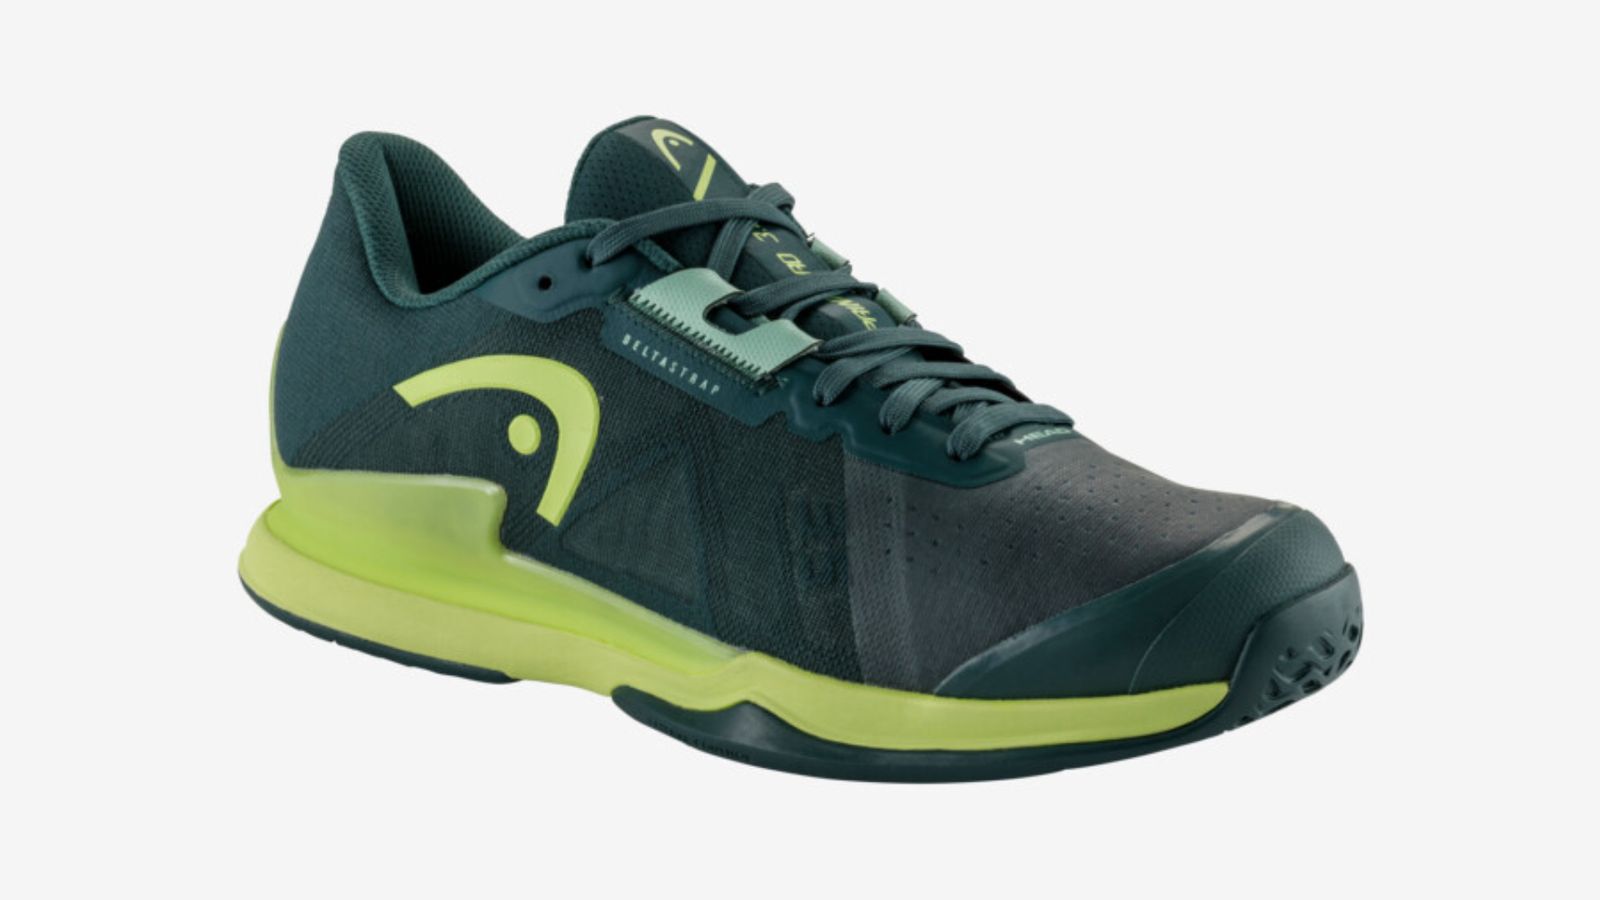 HEAD Sprint Pro 3.5 product image of a dark green tennis shoe featuring lime green details and branding.